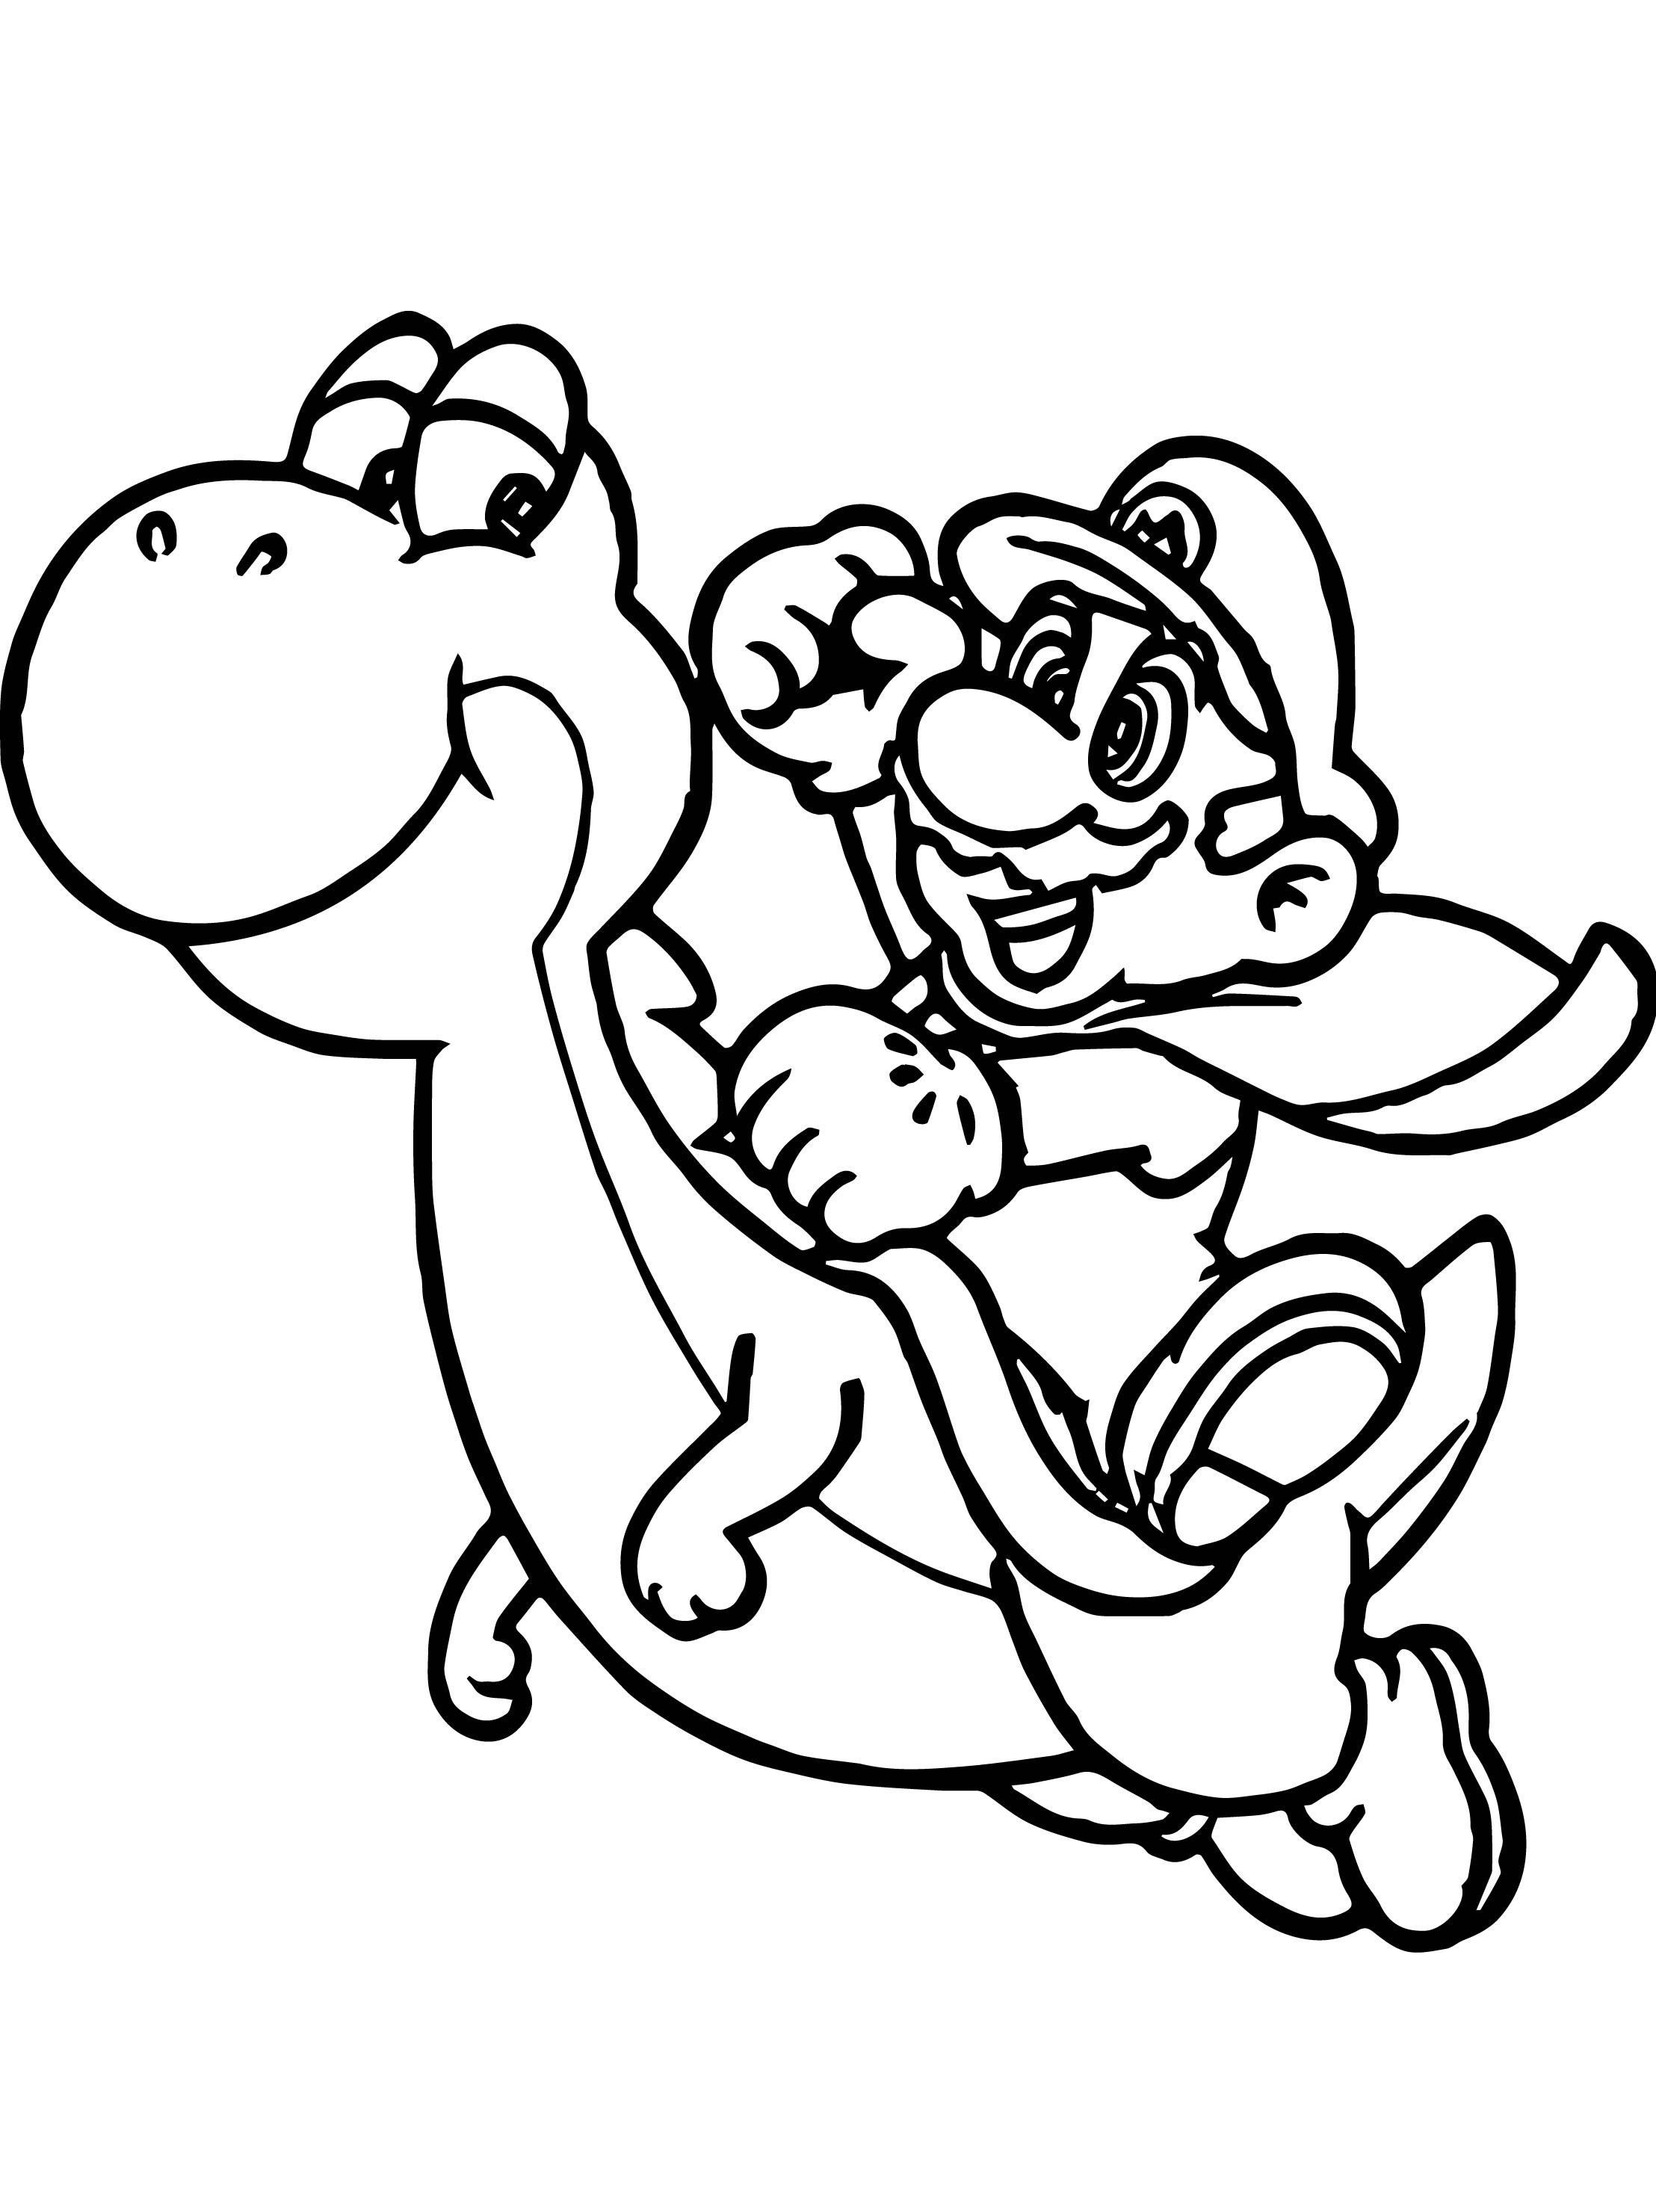 Yoshi Coloring Pages Pdf For Kids - Mario And Yoshi Coloring Pages